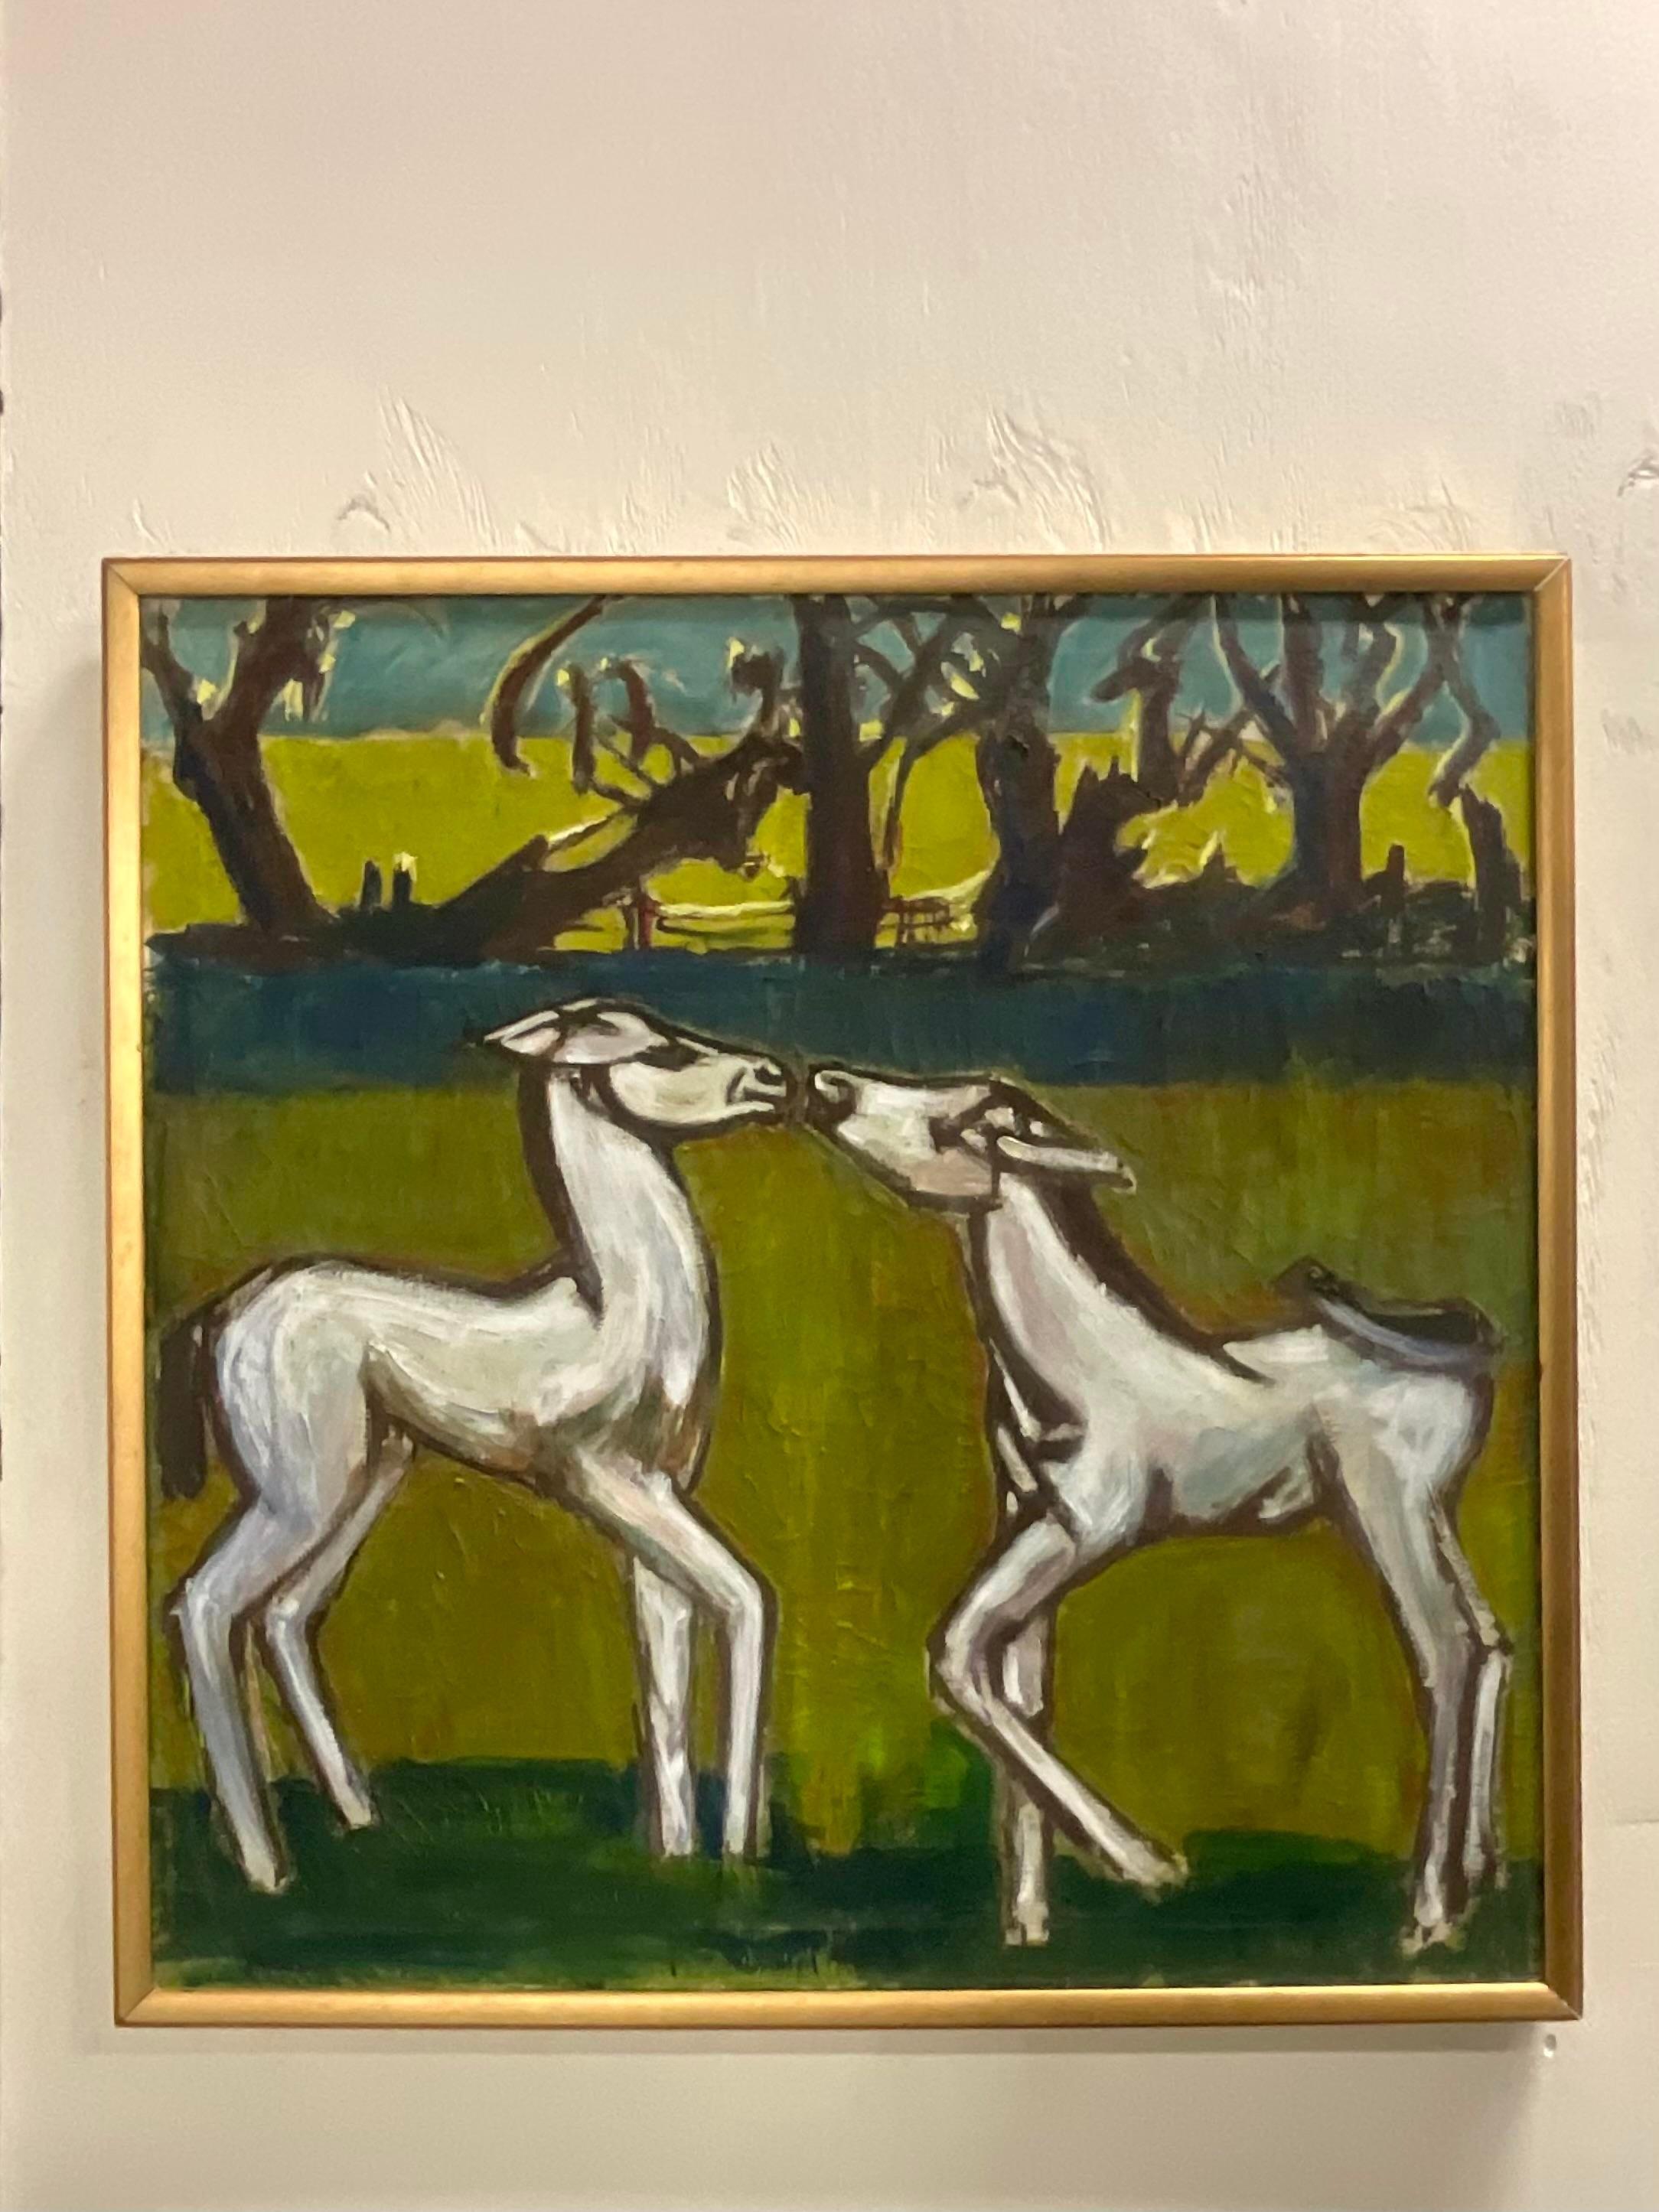 A fabulous vintage Boho original oil painting on canvas. Two white calves on a brilliant green background. Acquired from a Palm Beach estate.